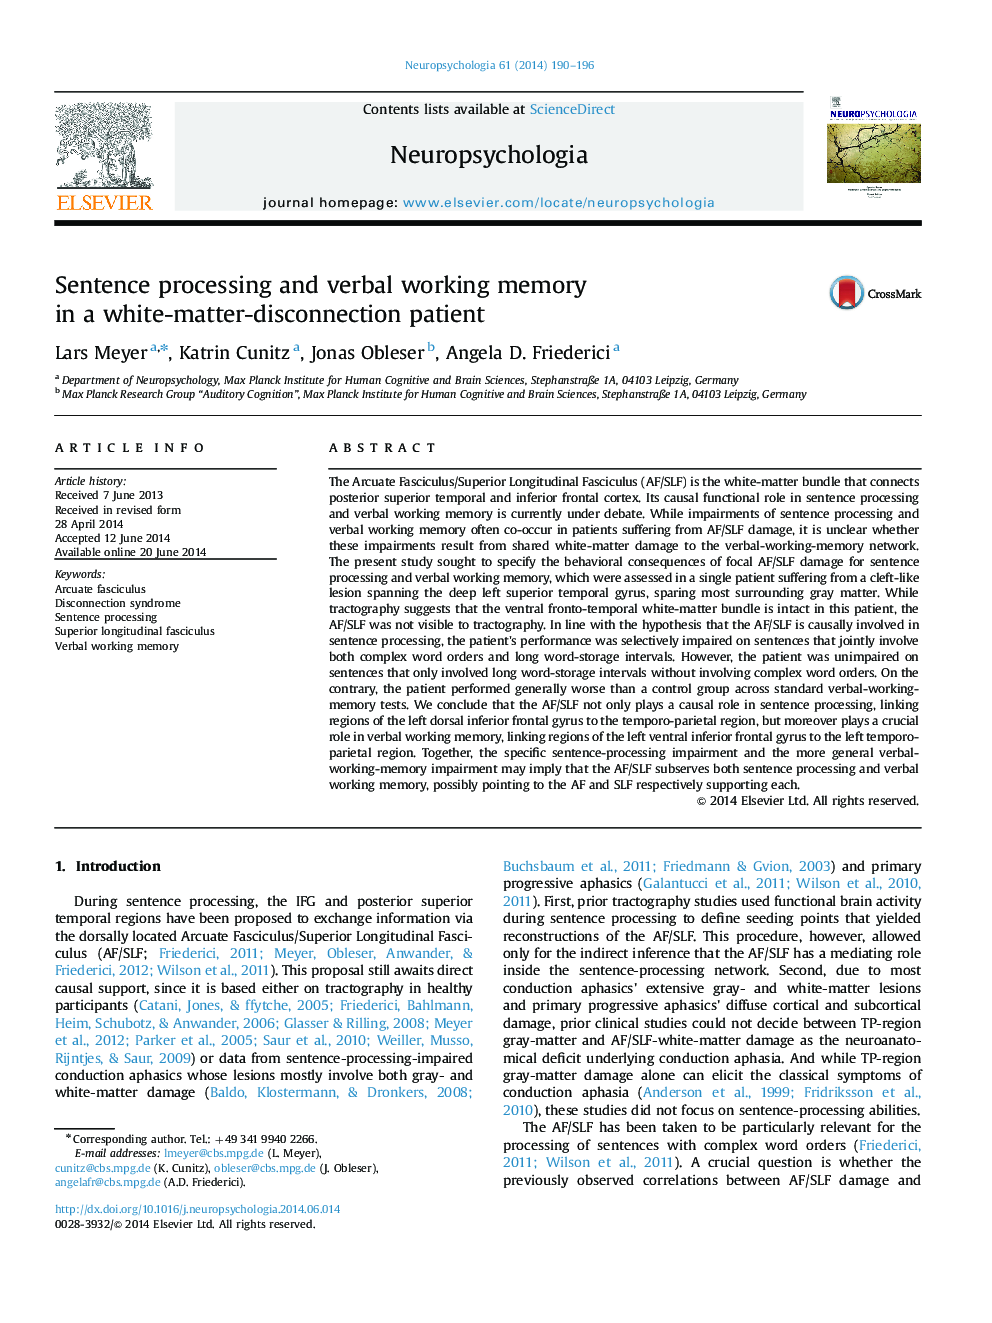 Sentence processing and verbal working memory in a white-matter-disconnection patient